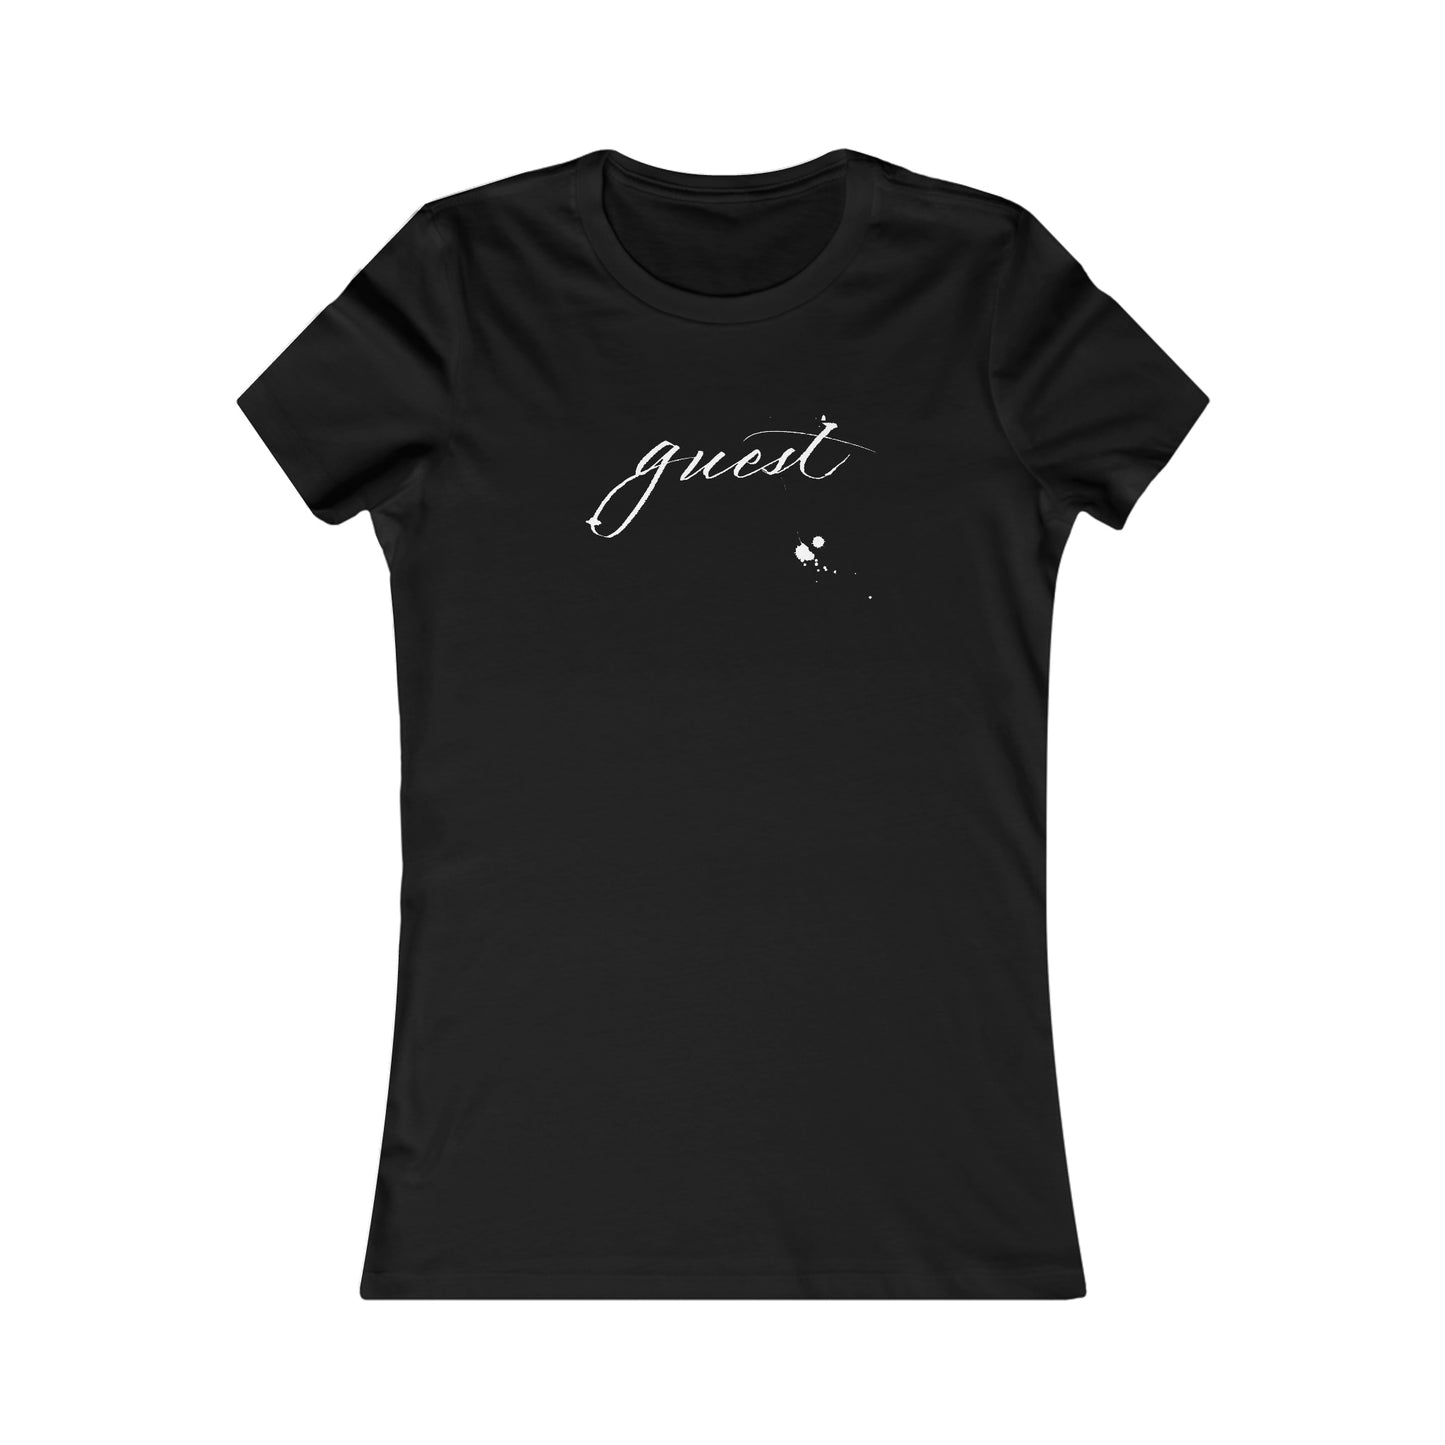 "Guest" Mixed Messages Fitted T-Shirt